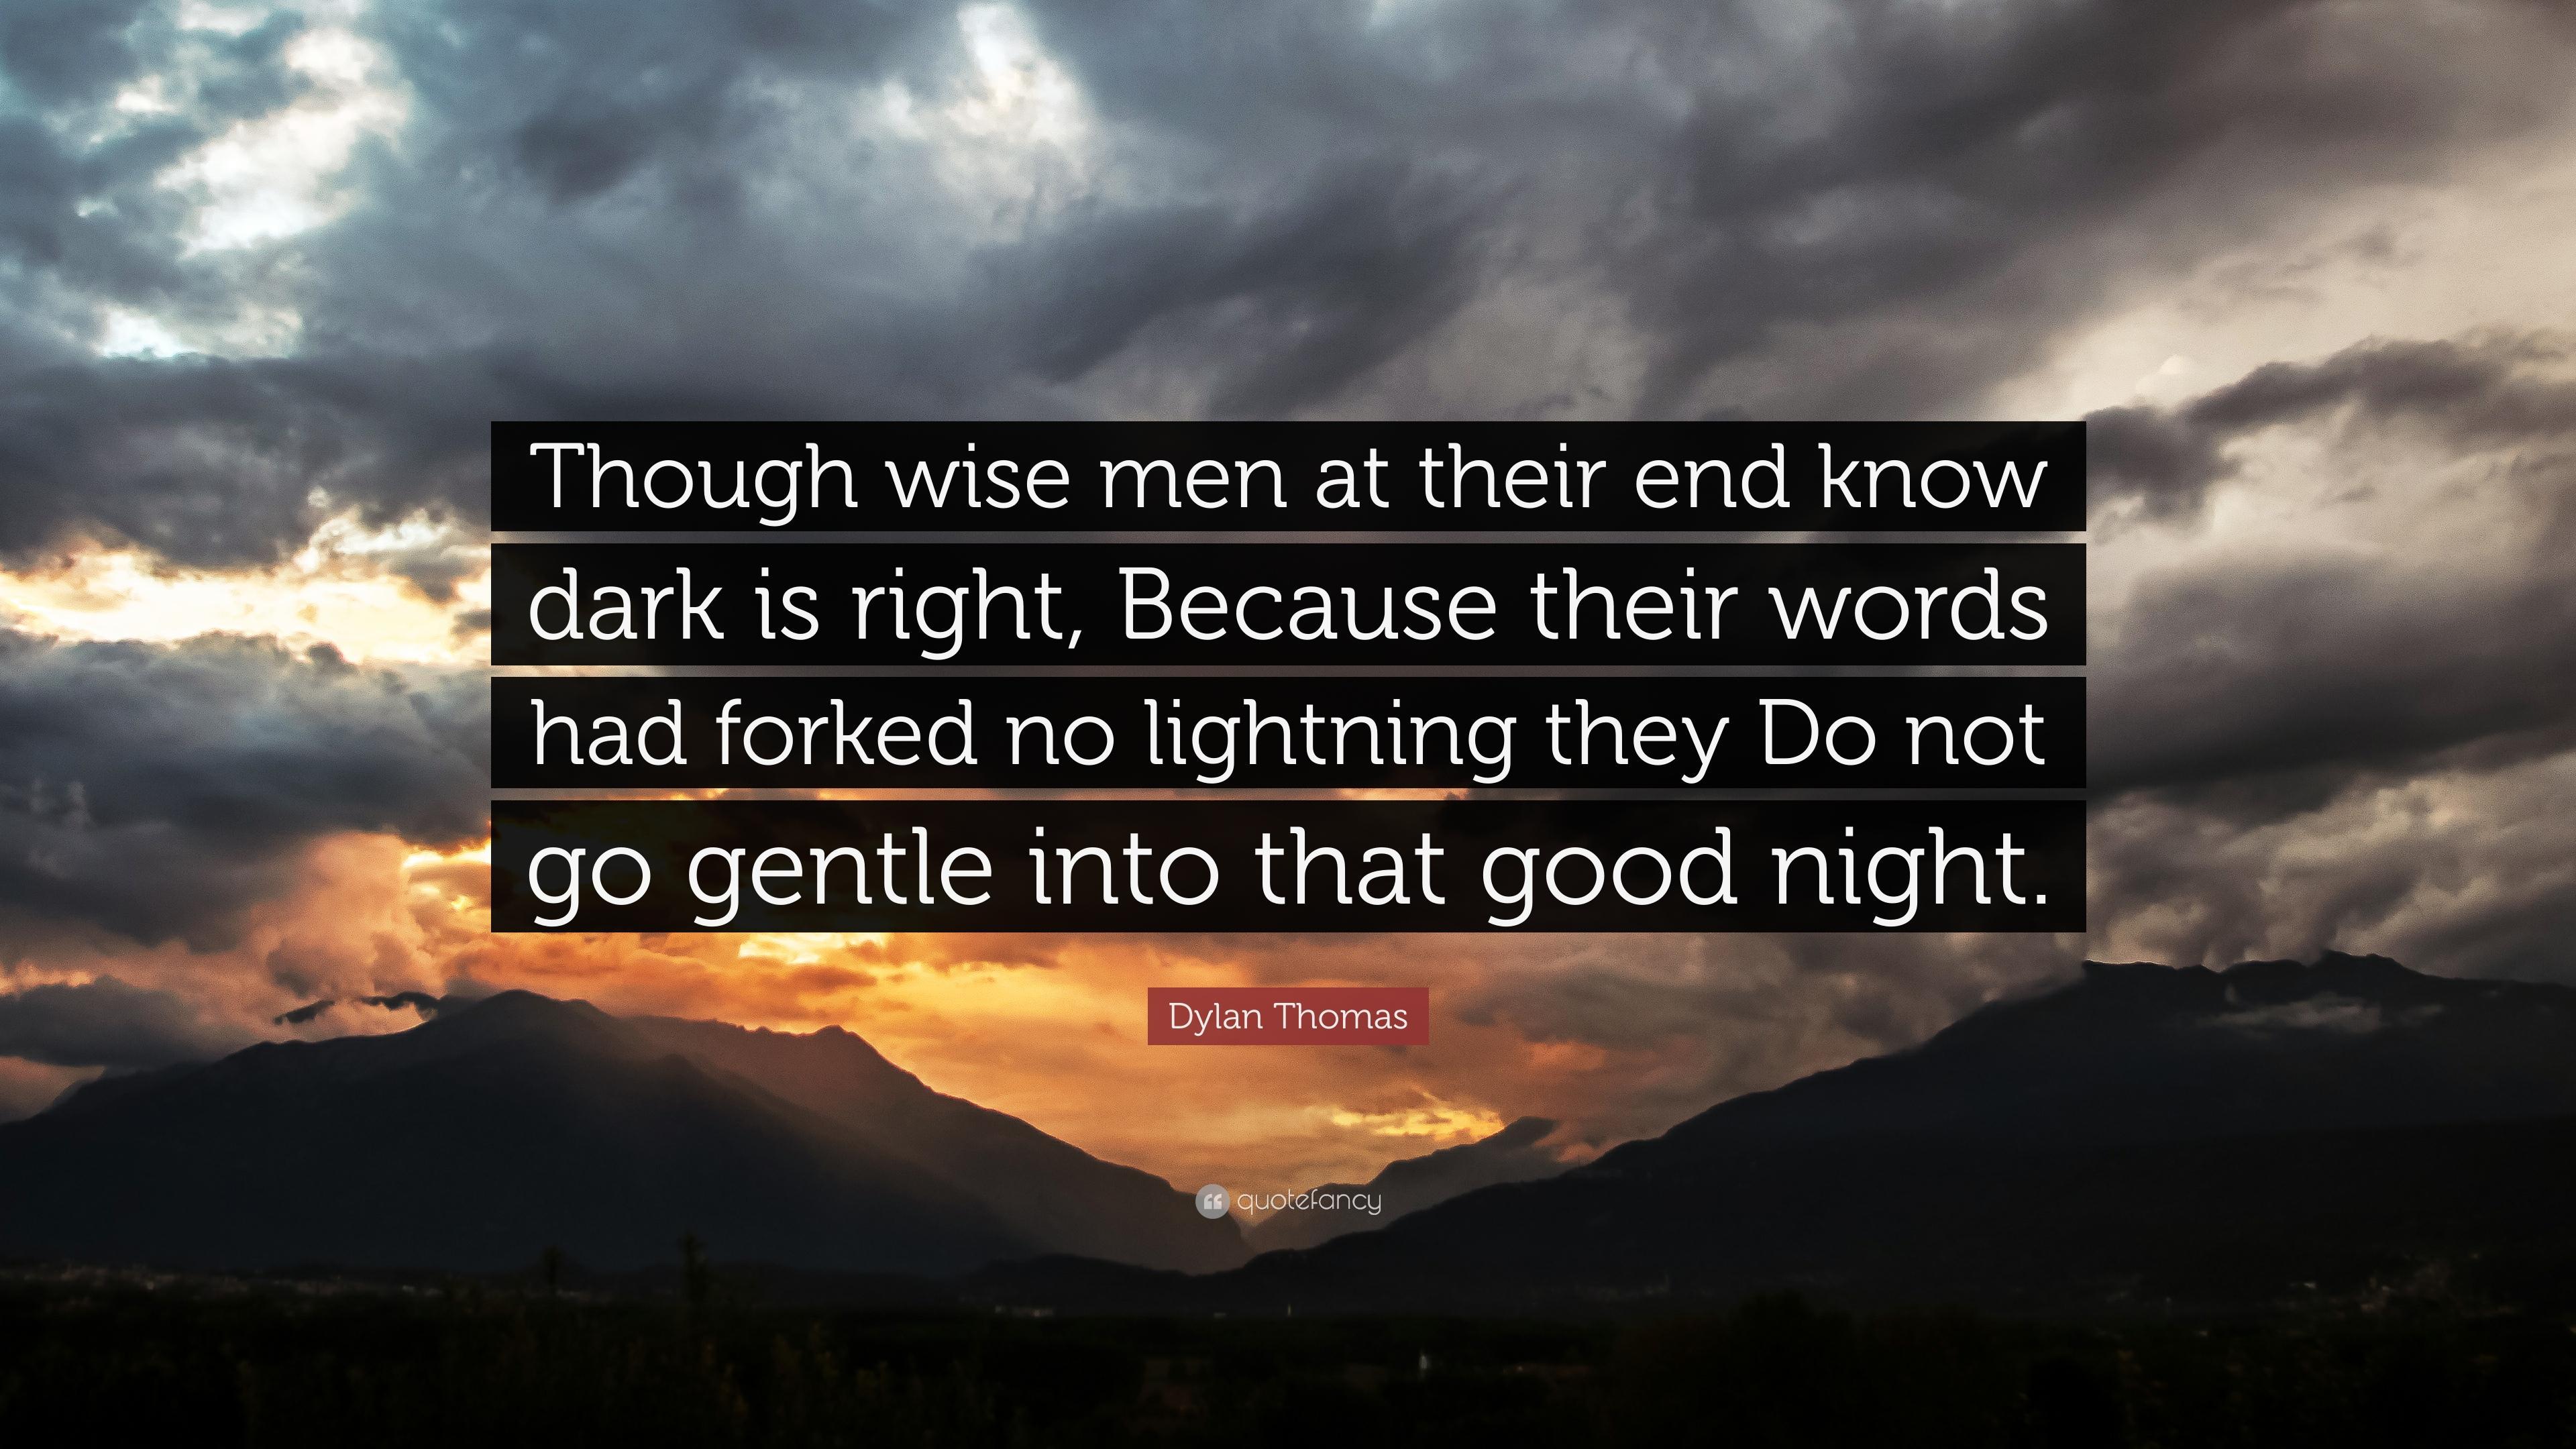 Dylan Thomas Quote: “Though wise men at their end know dark